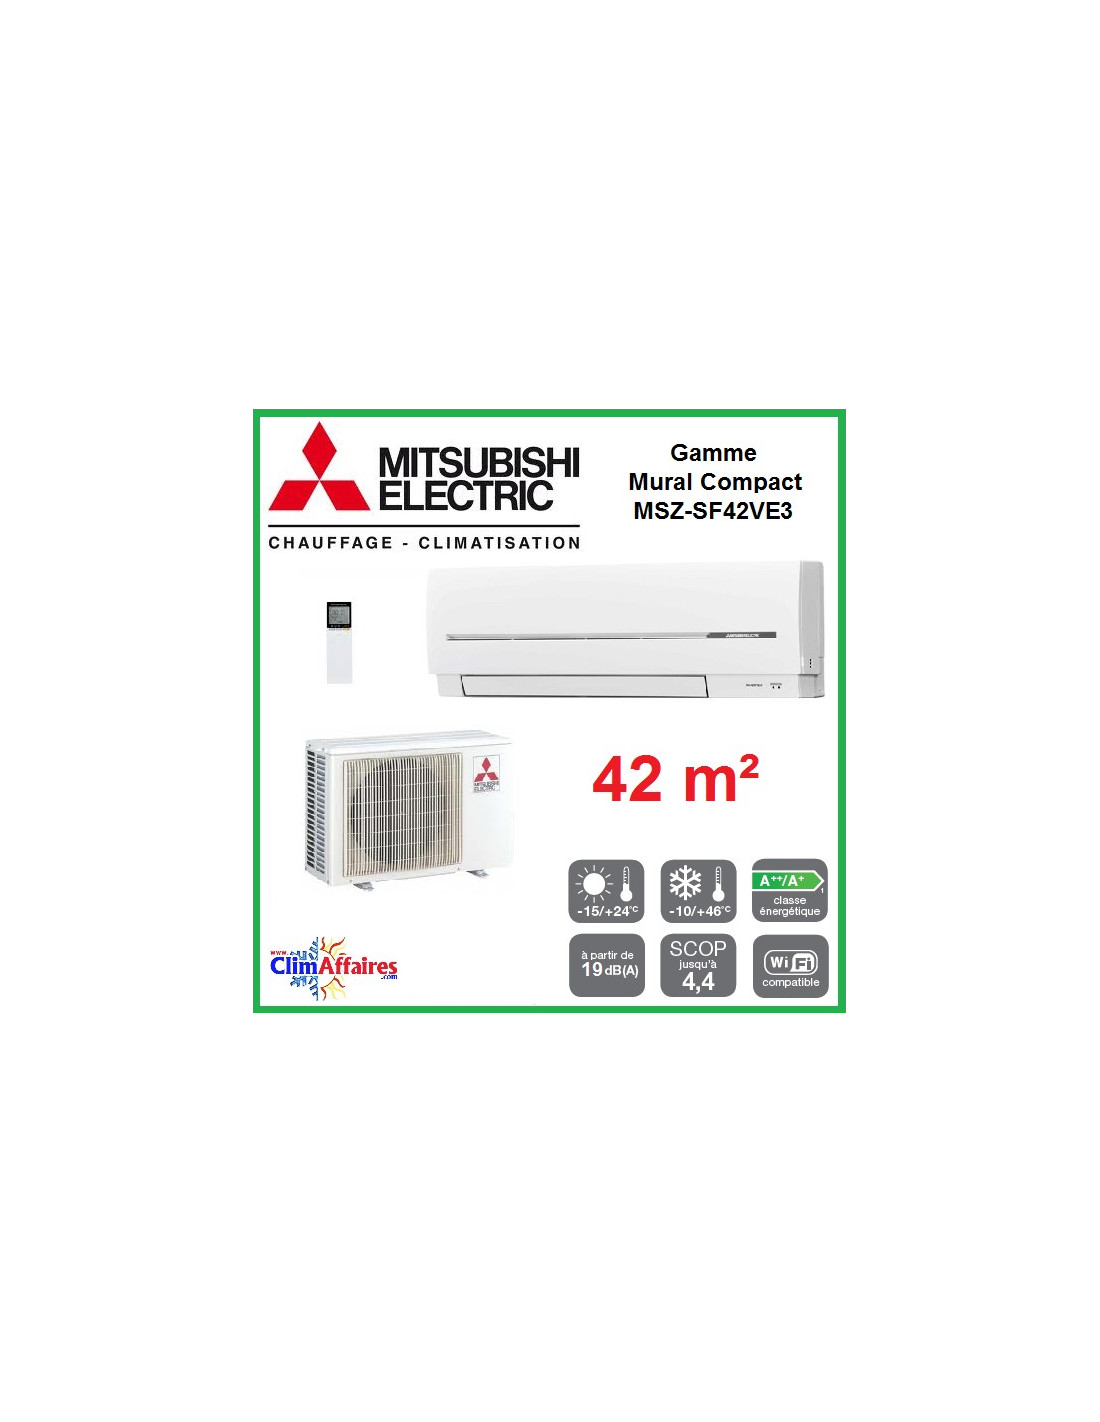 Pack Climatiseur Mitsubishi Mural Inverter Gamme Compact